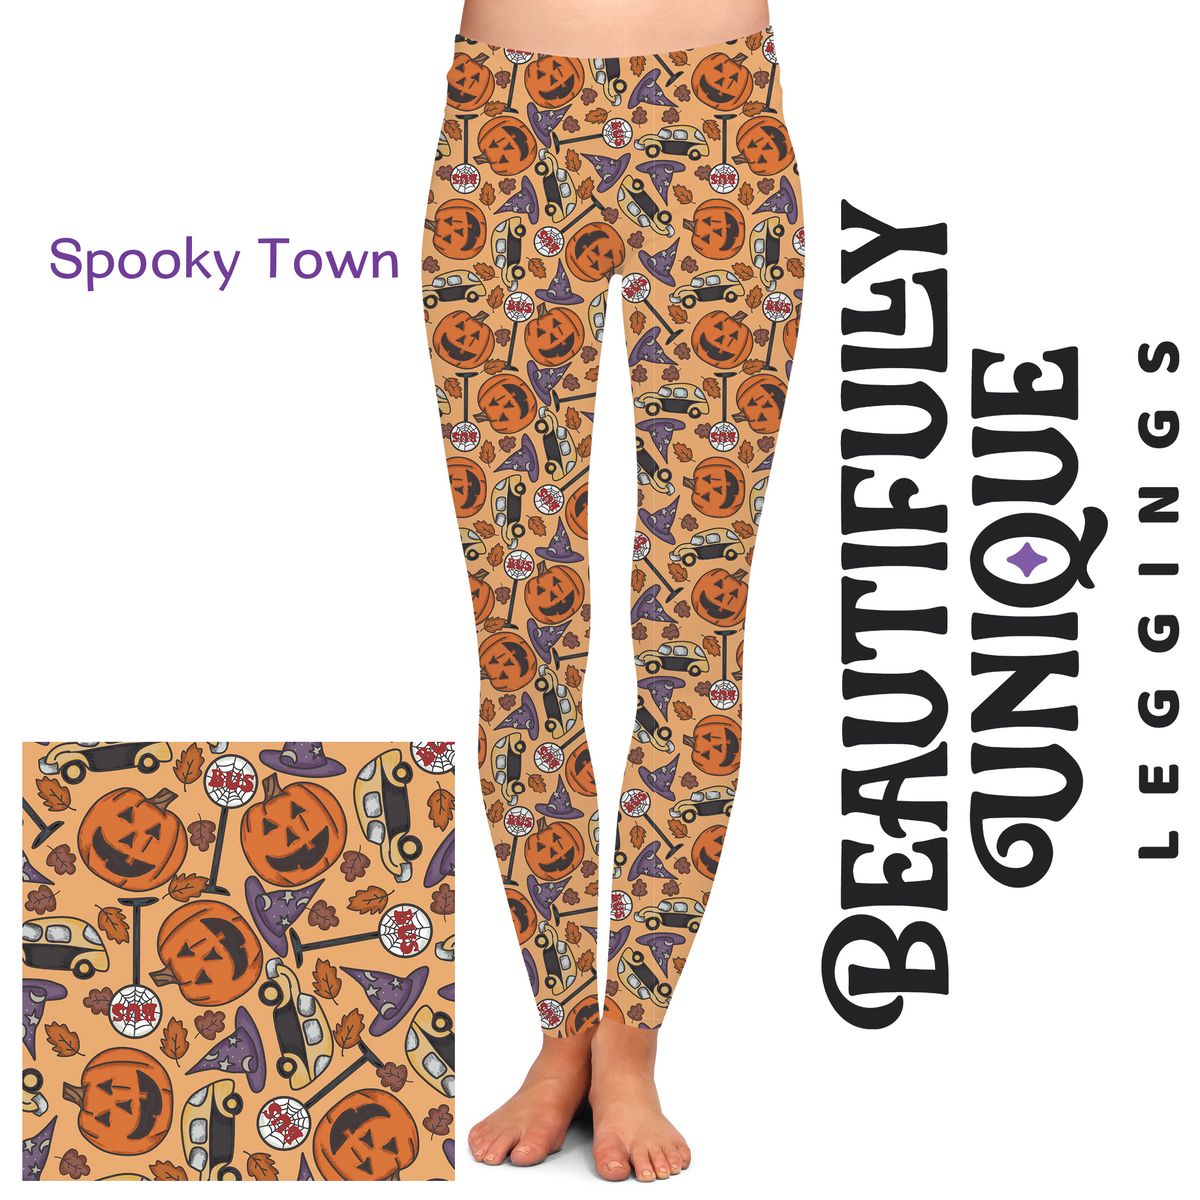 Spooky Town (Semi-Exclusive) - High-quality Handcrafted Vibrant Leggings